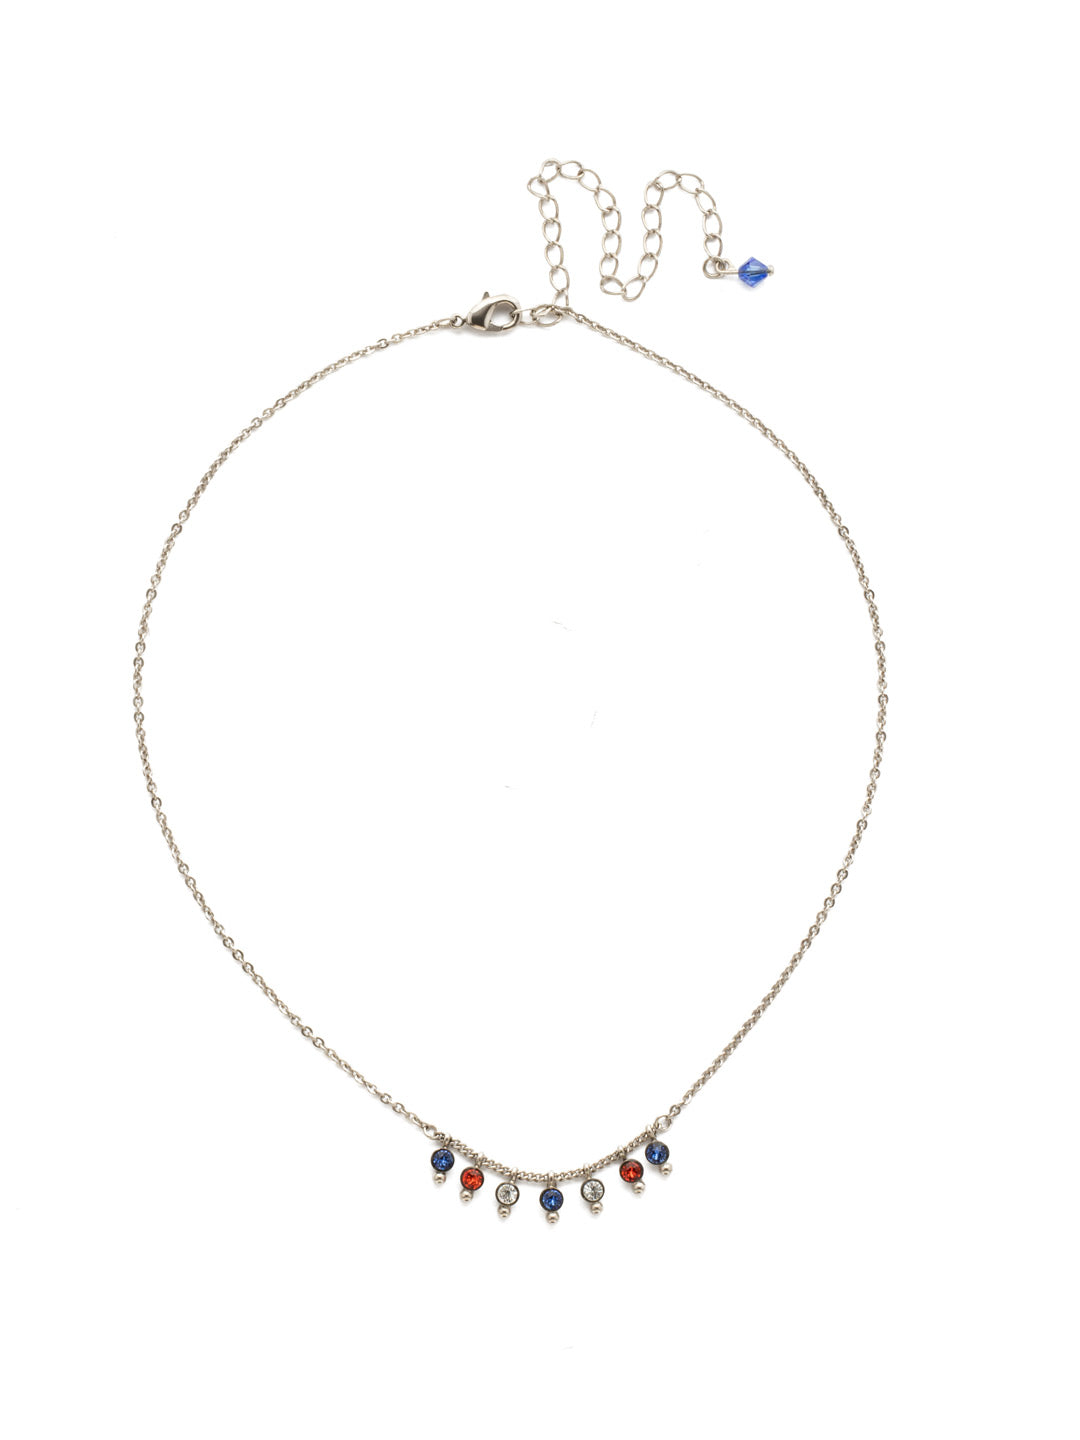 Delicate Dots Pendant Necklace - NDN115ASOCR - Seven petite round cut crystals in ornamental metal settings adorn a thin chain in this simple, easy-to-layer necklace. From Sorrelli's Orange Crush collection in our Antique Silver-tone finish.